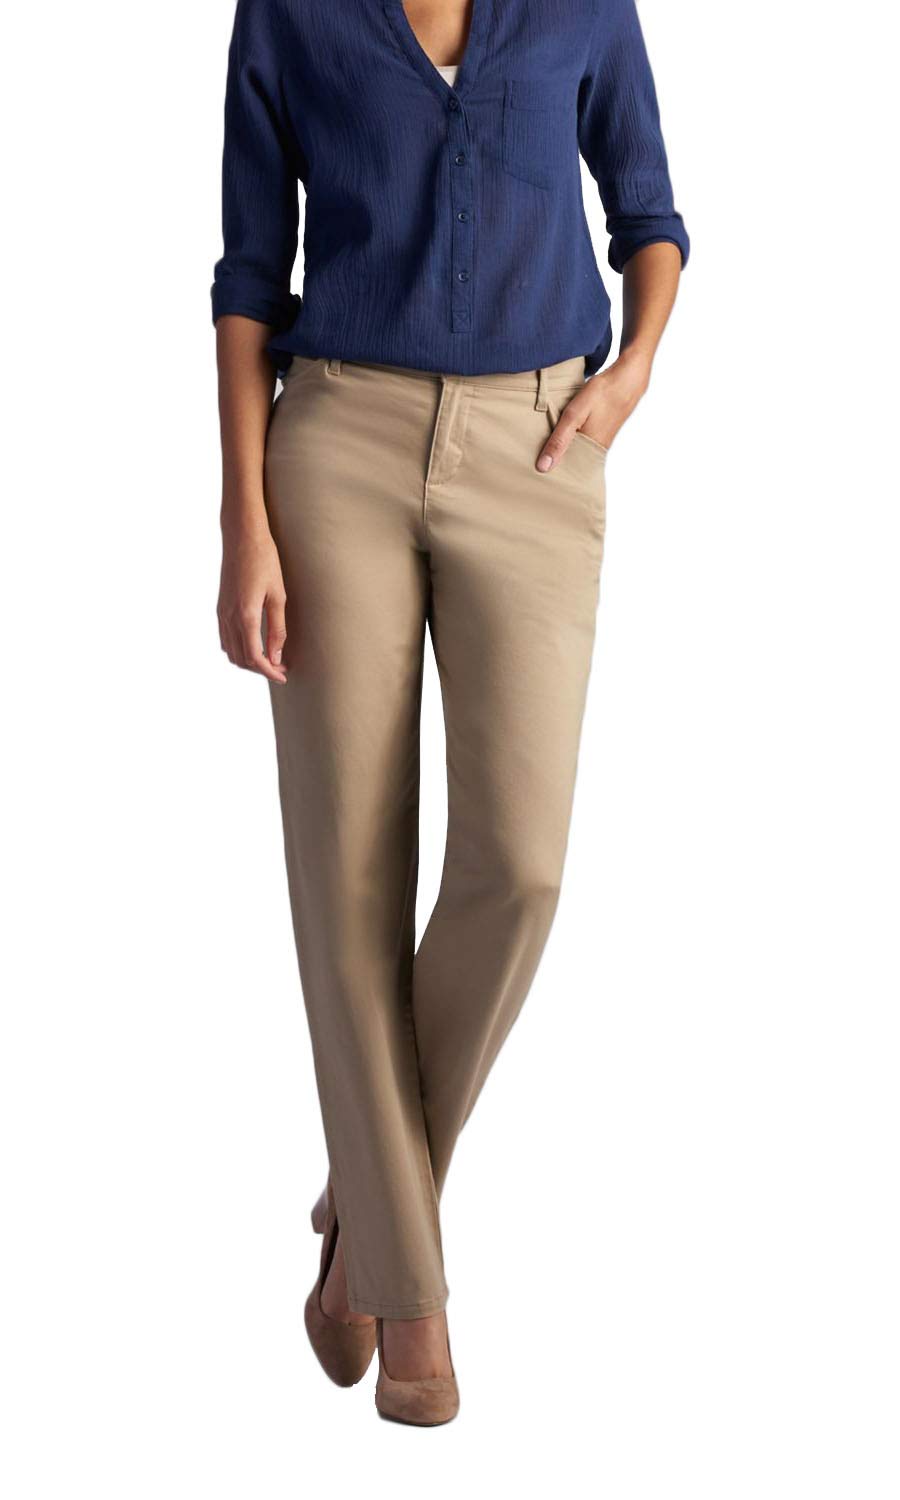 Lee Women's Relaxed Fit All Day Straight Leg Pant Flax 12